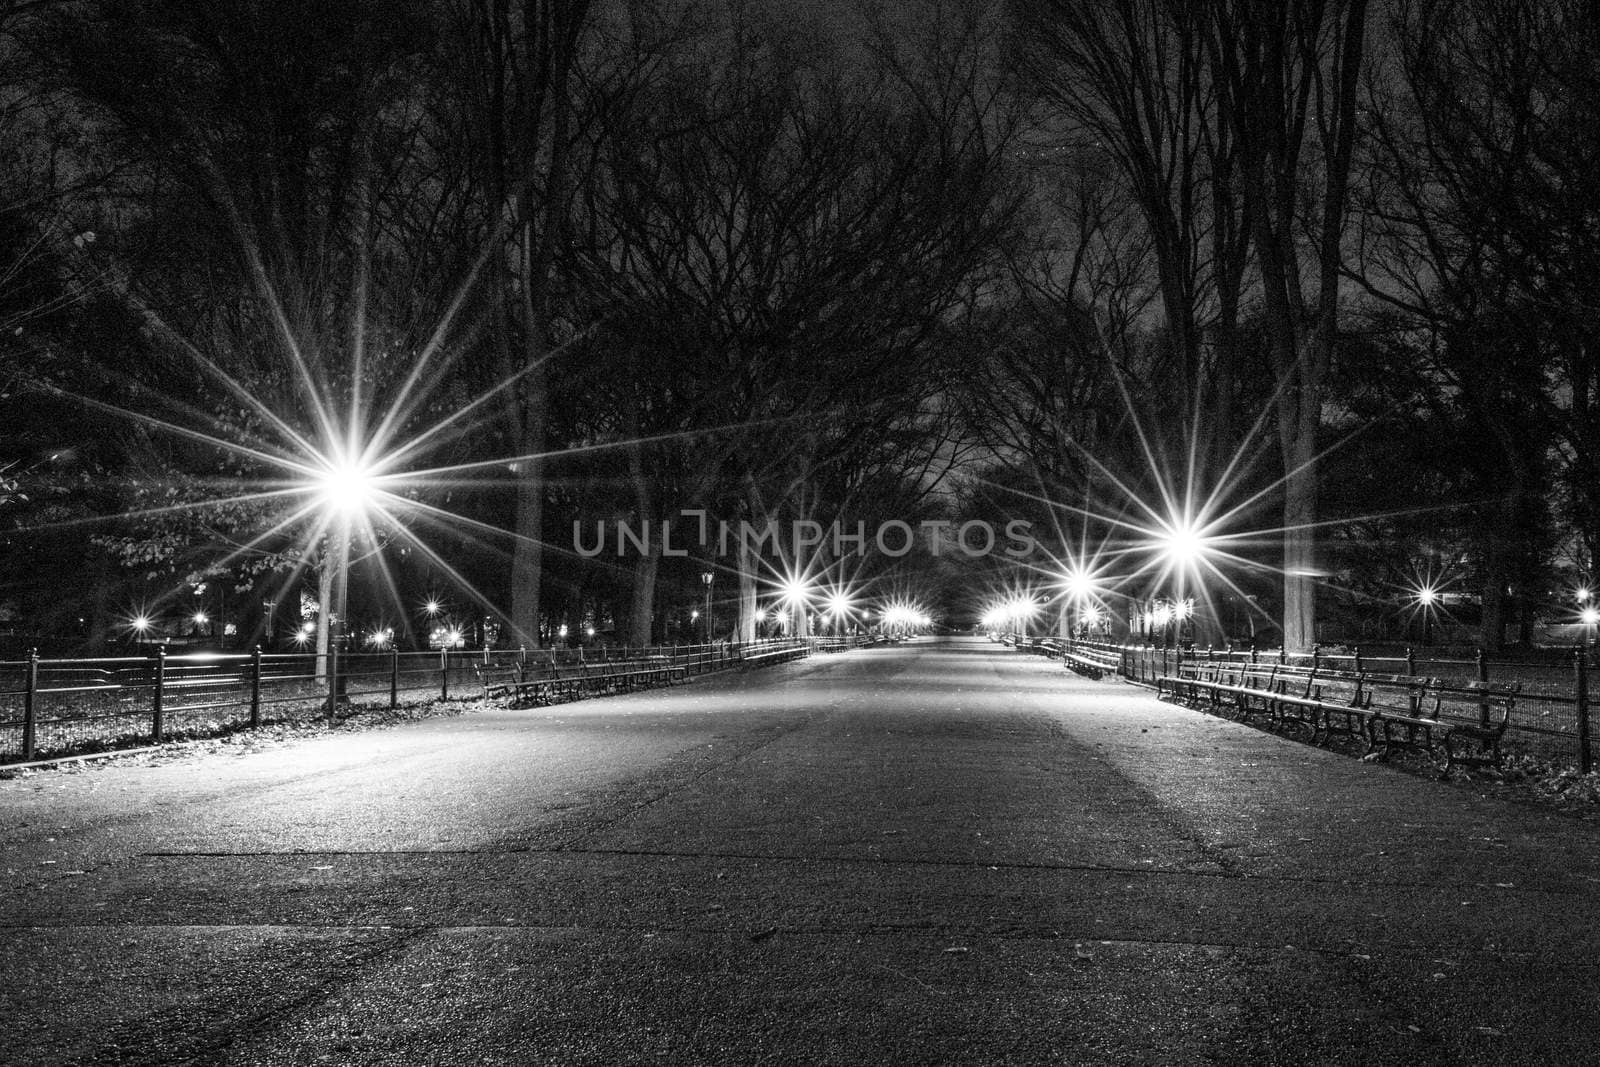 The Mall in black and white by rmbarricarte